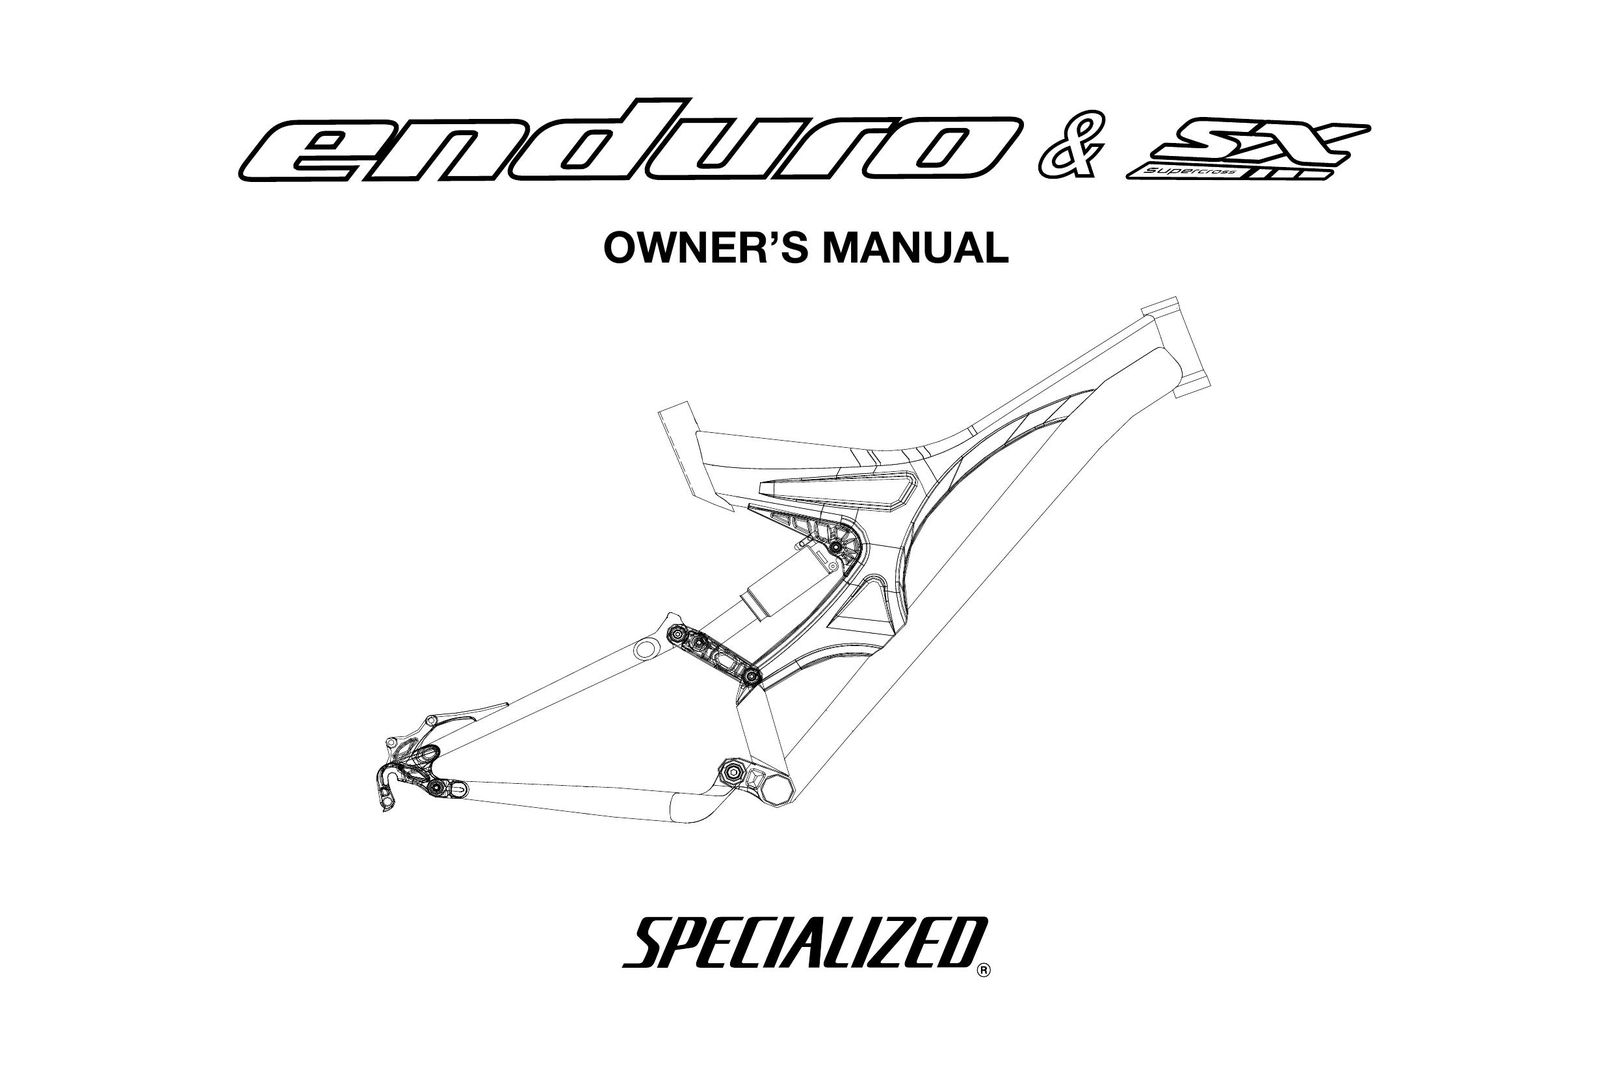 Specialized Enduro Bicycle User Manual